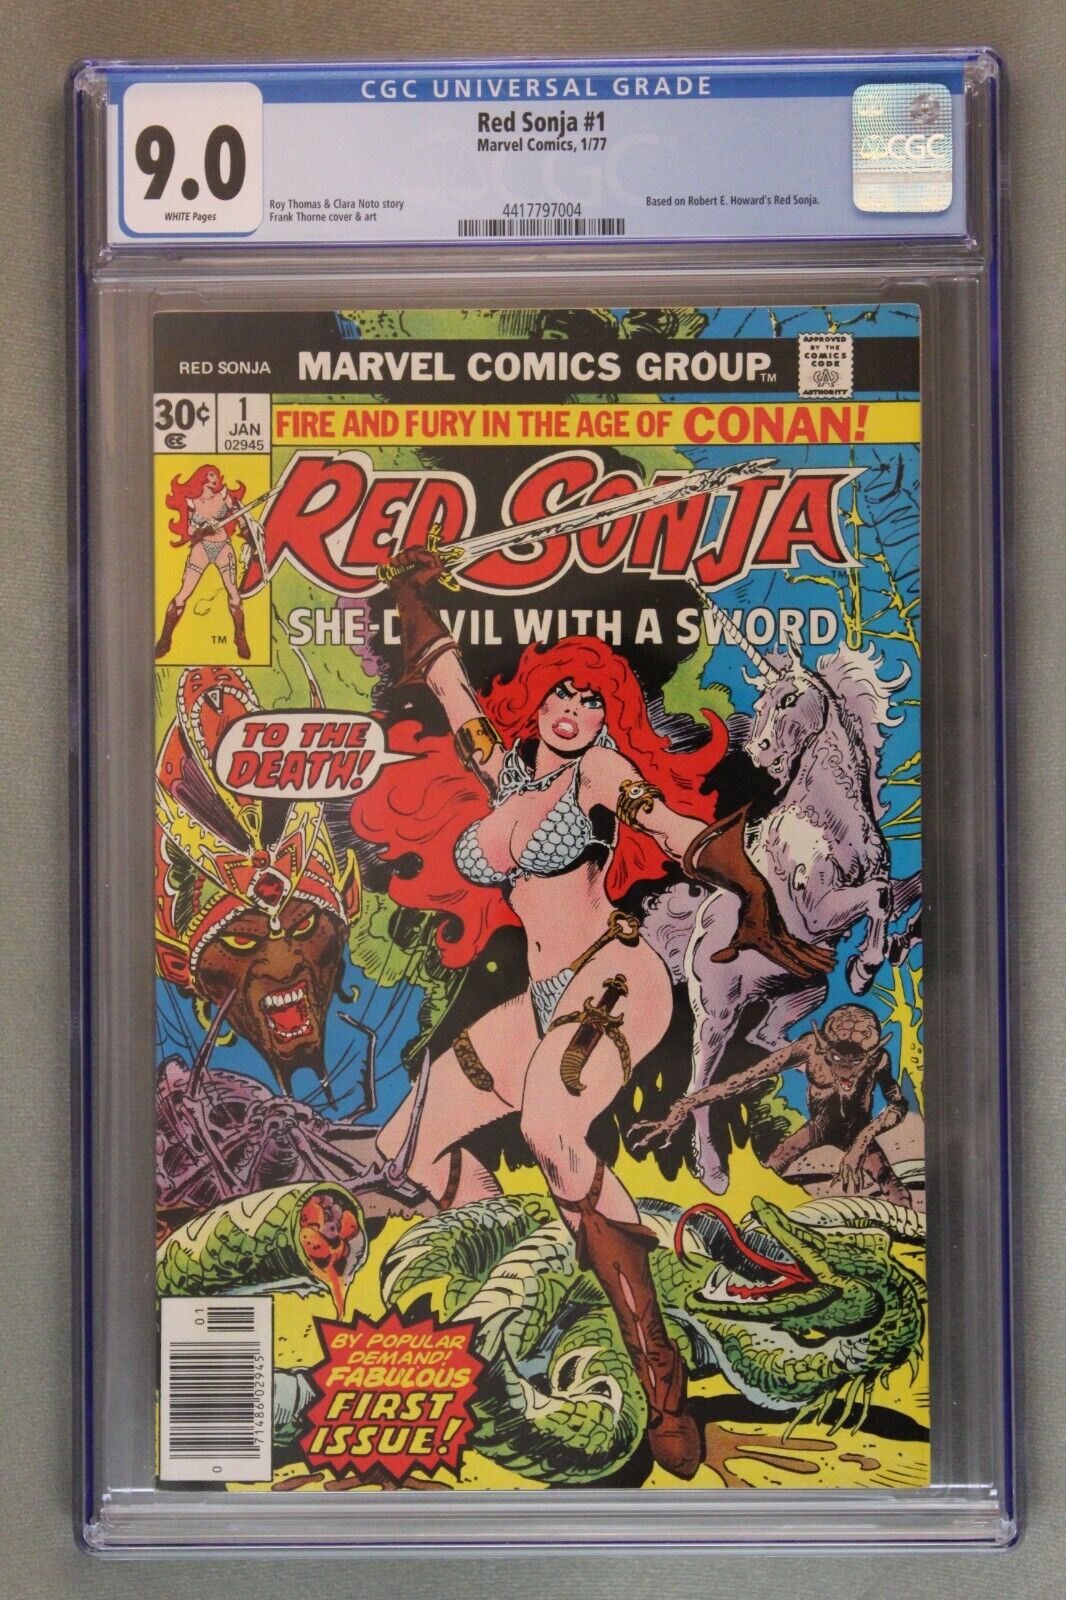 Red Sonja #1 ~ 1/77 She-Devil With A Sword ~ 9.0 CGC Graded, Thorne-Cover & Art